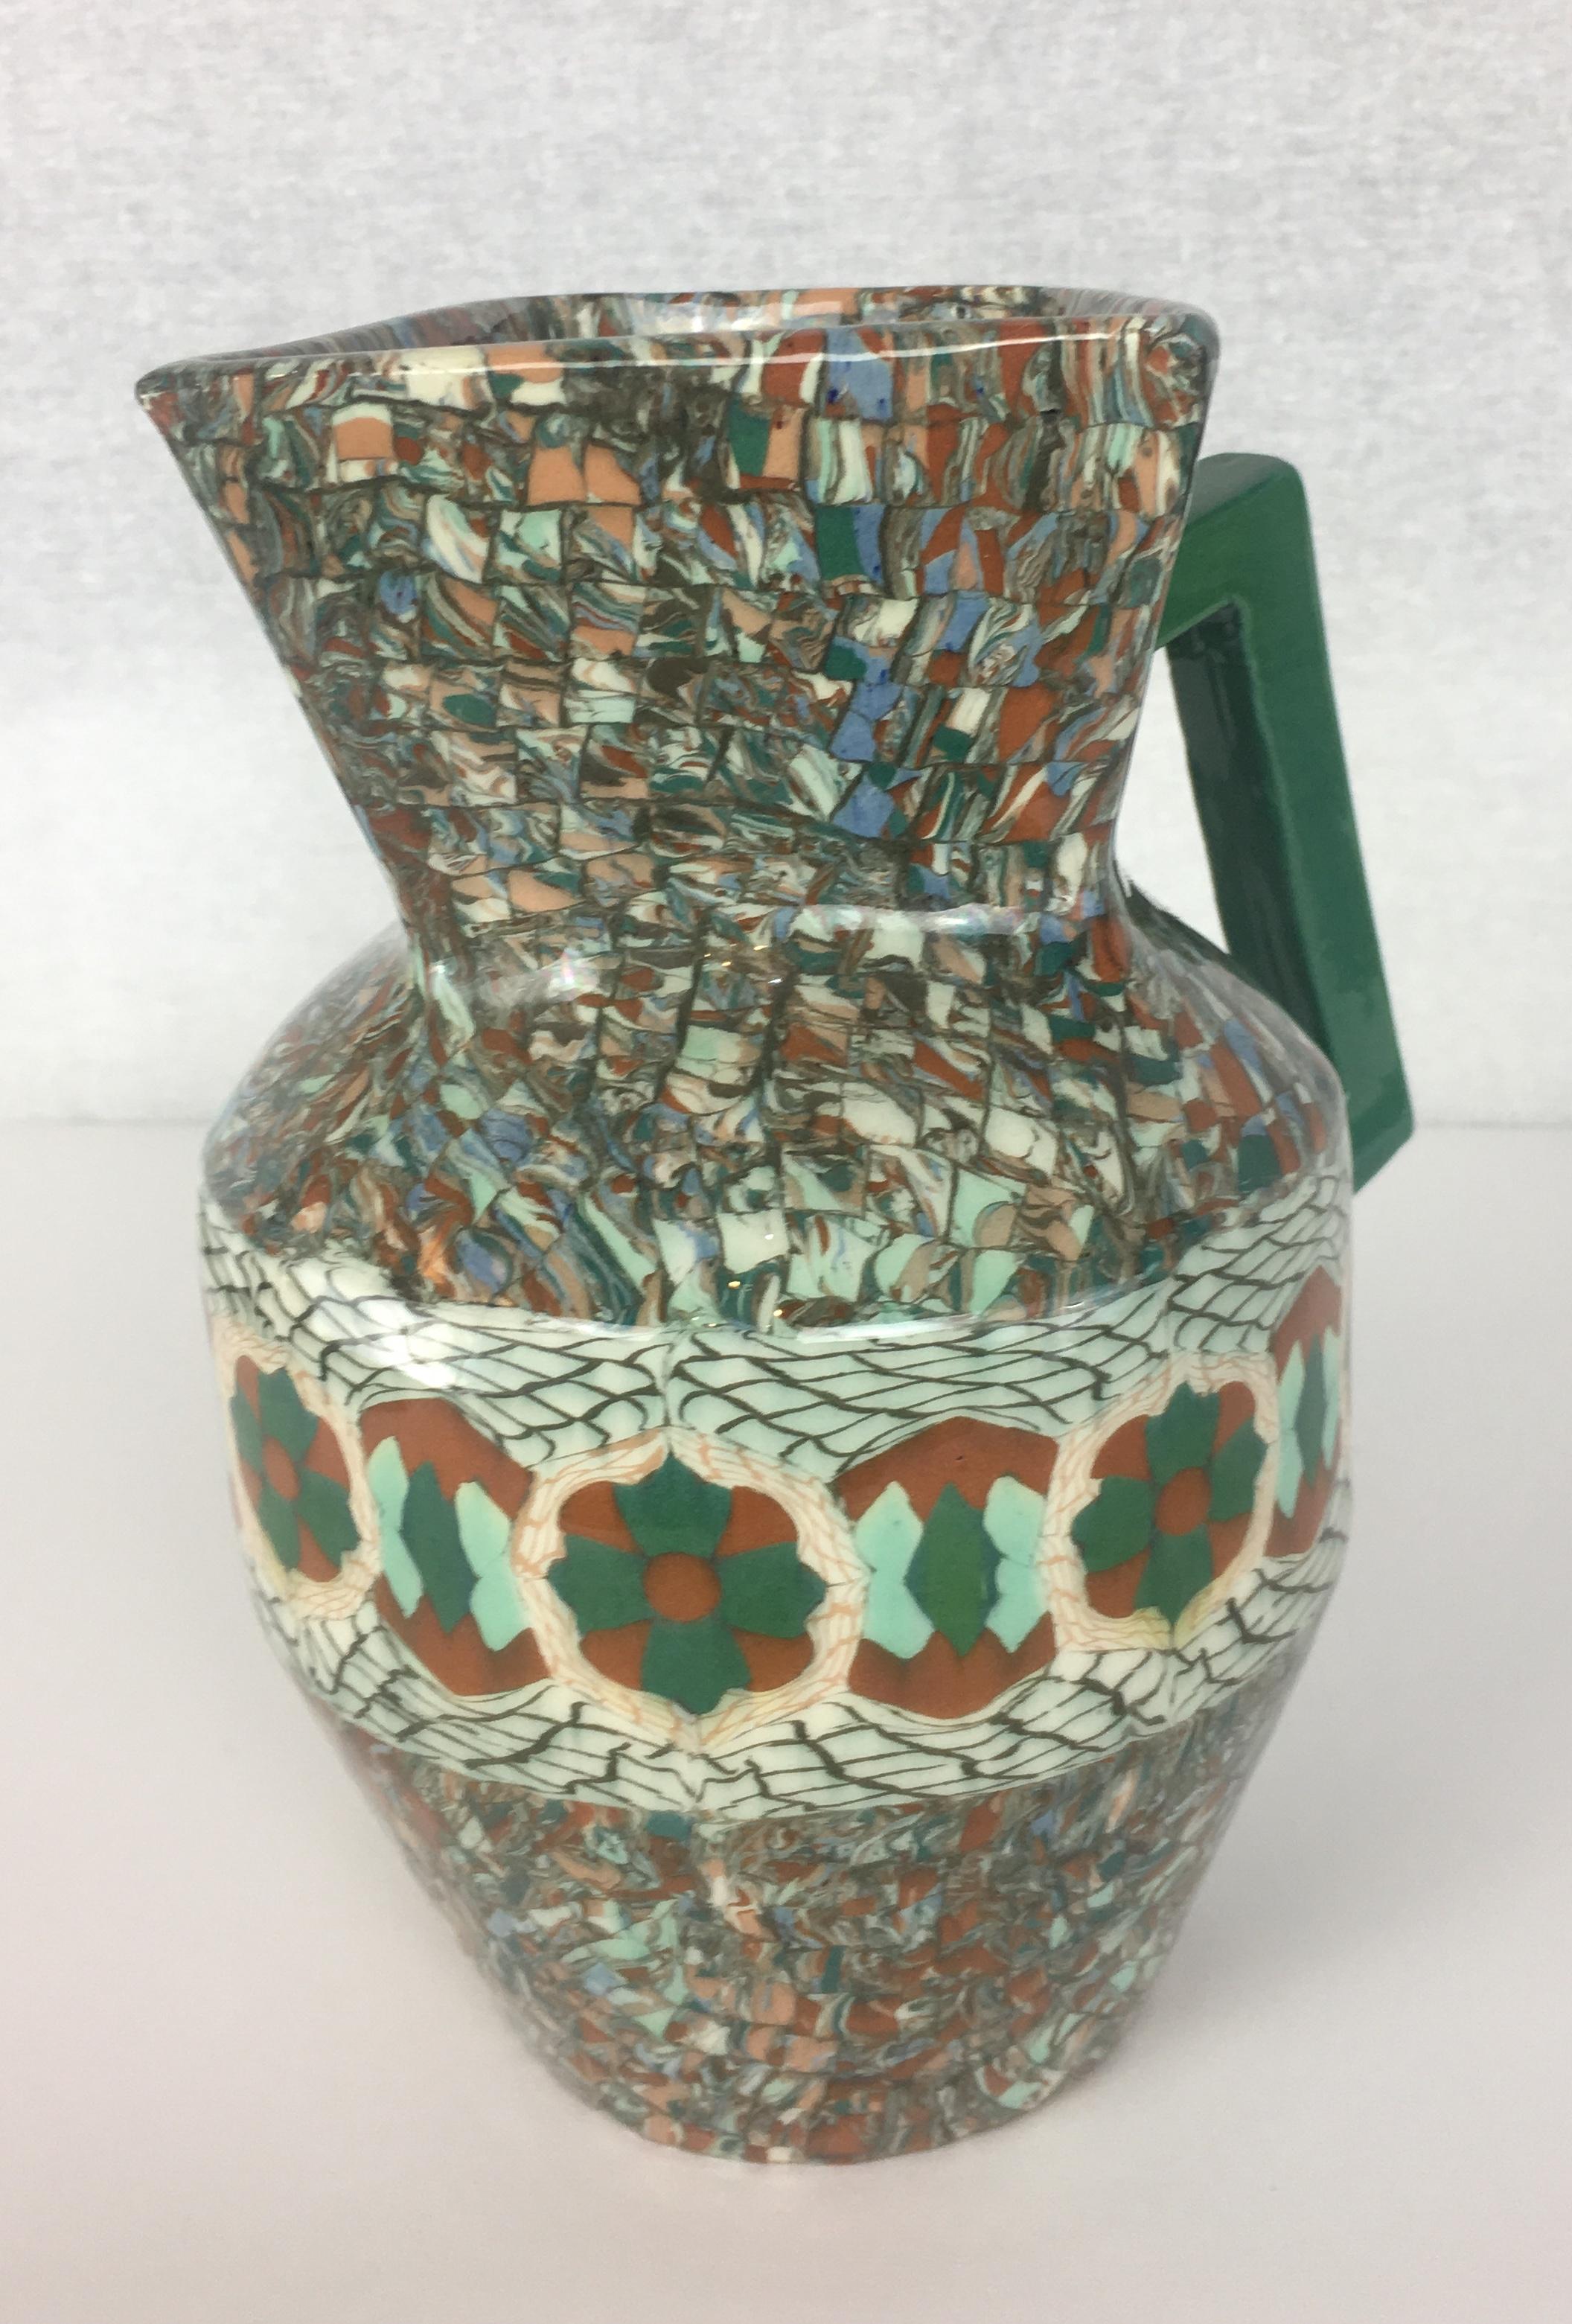 French Clay Mosaic Pitcher or Jug by Master Ceramicist Jean Gerbino 1